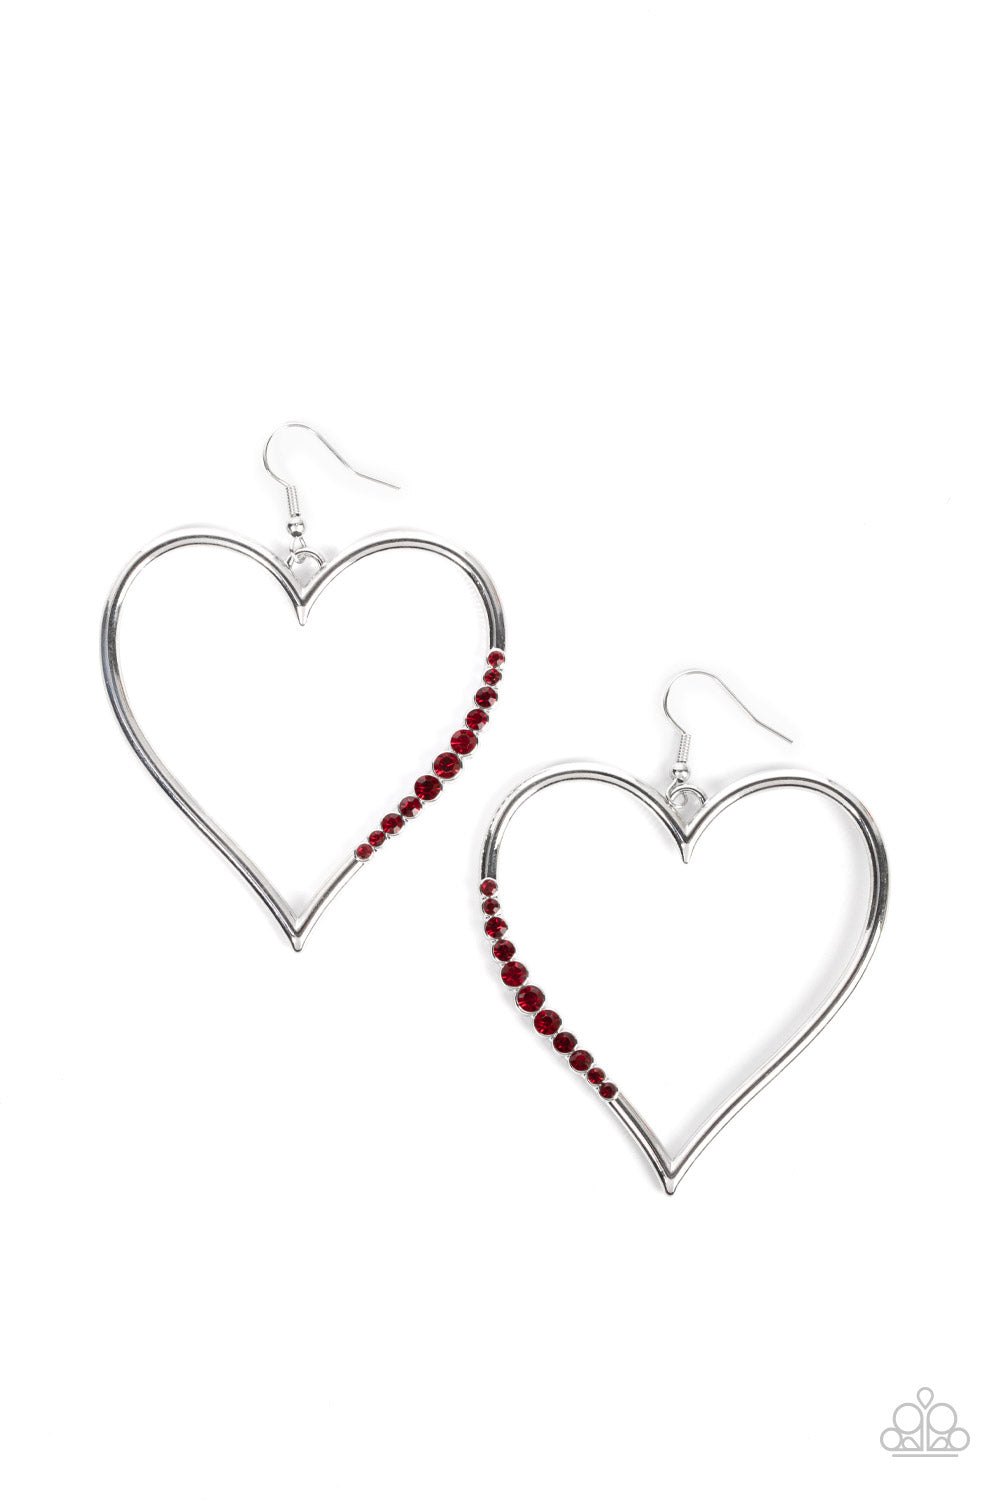 Bewitched Kiss Red-Earrings